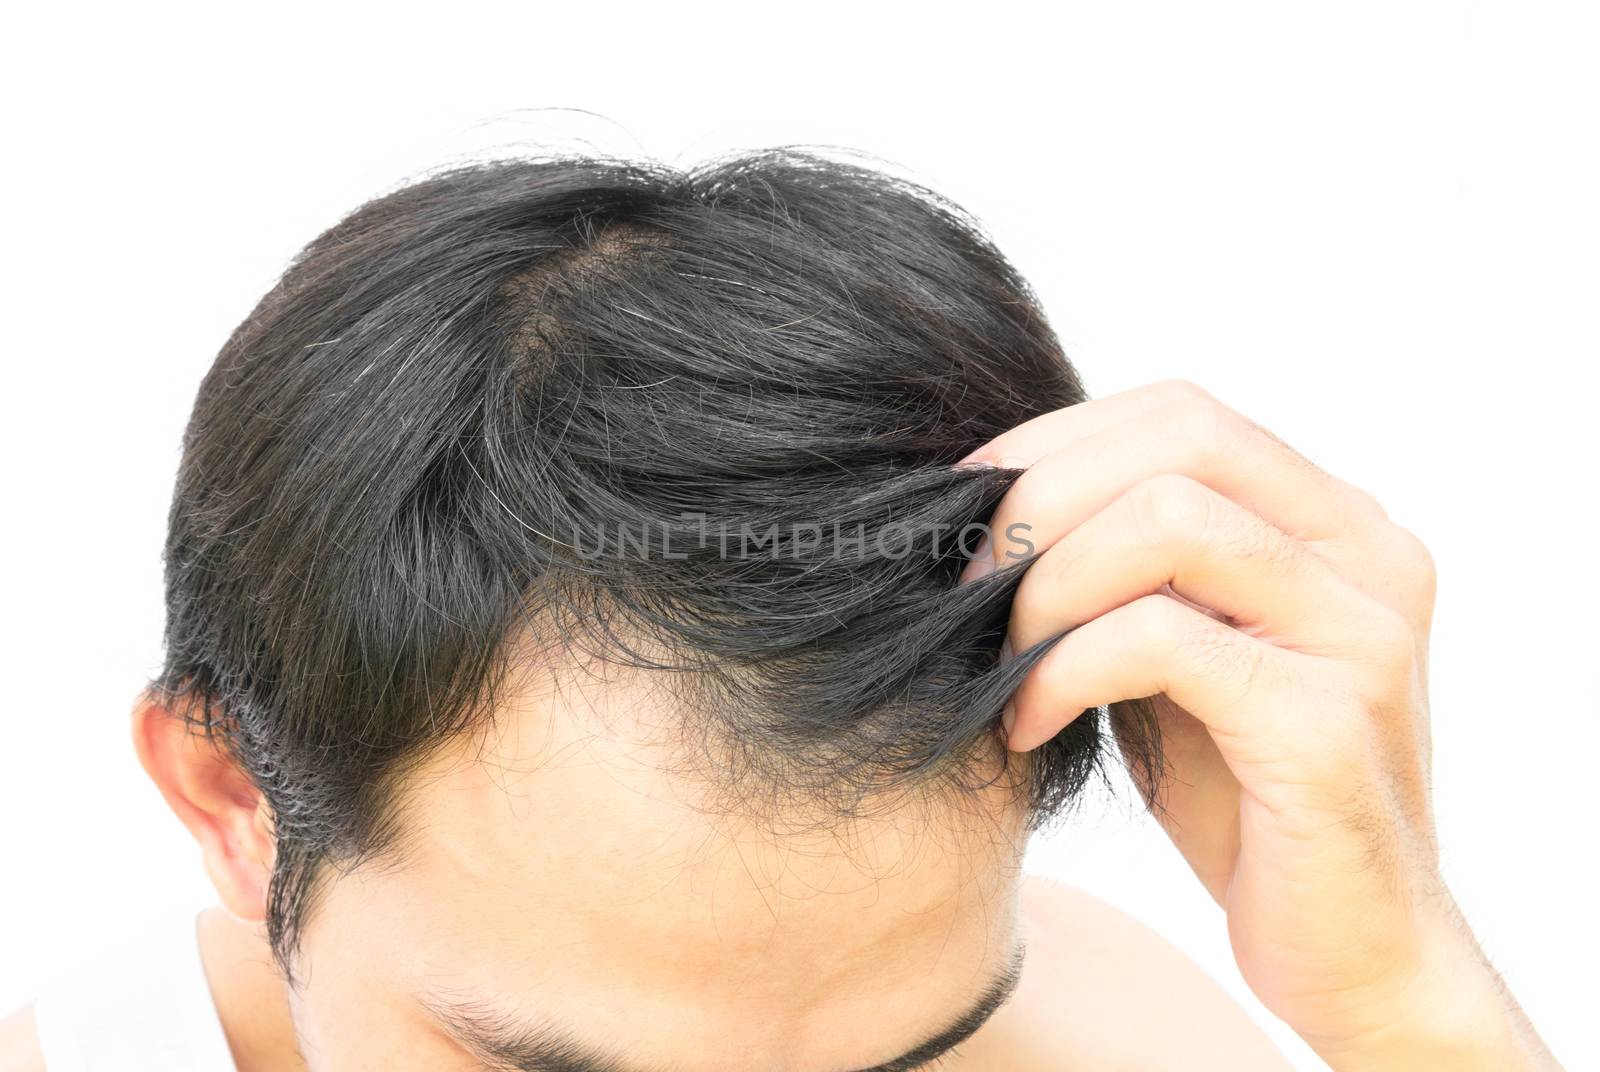 Closeup young man serious hair loss problem for hair loss concept or health care shampoo product on white background